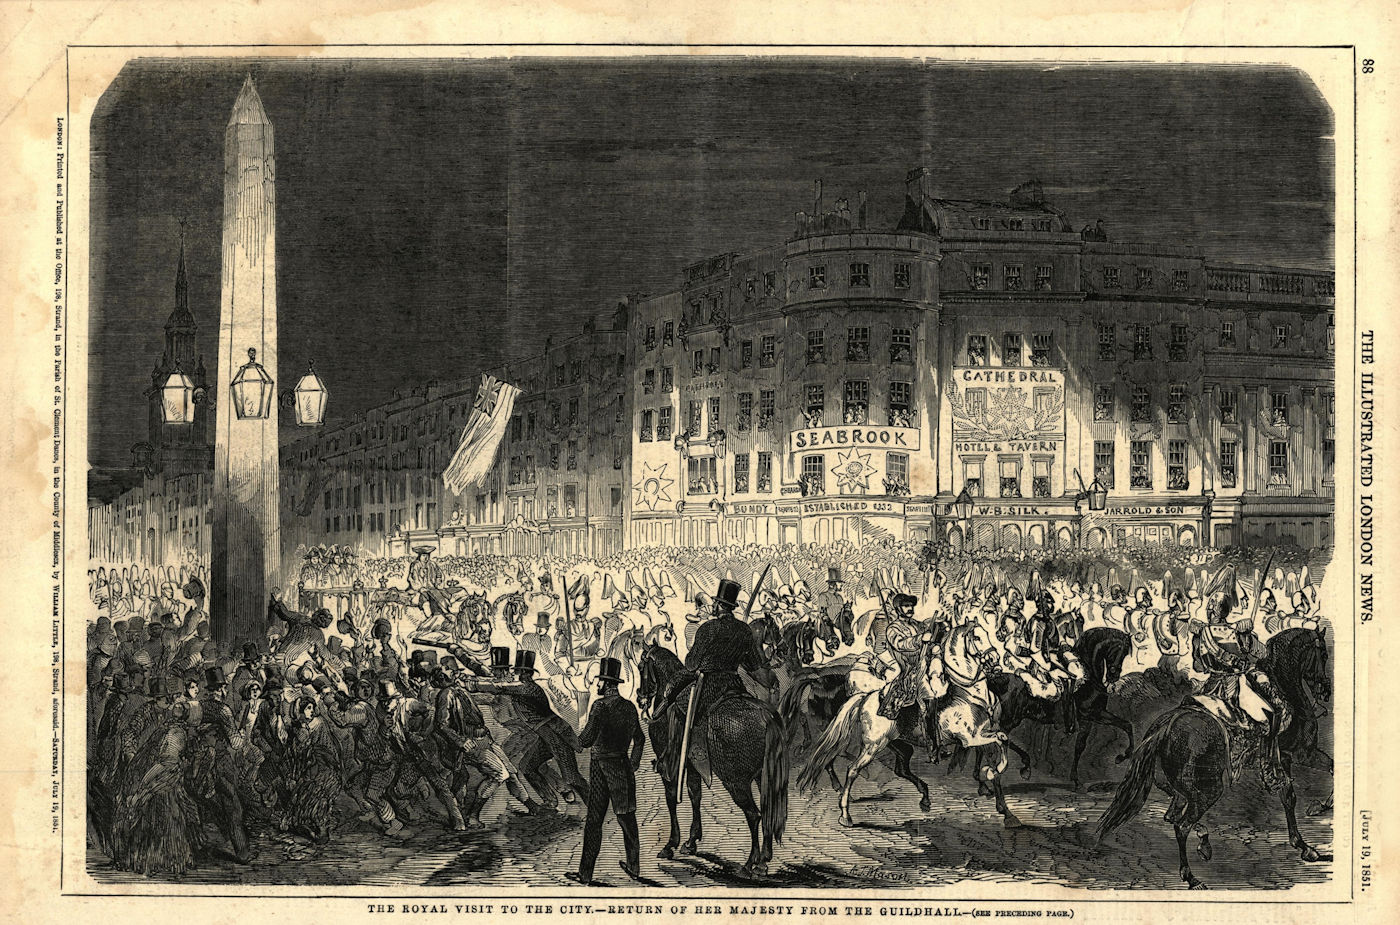 Associate Product Royal visit to the City - return of Her Majesty from the Guildhall. London 1851